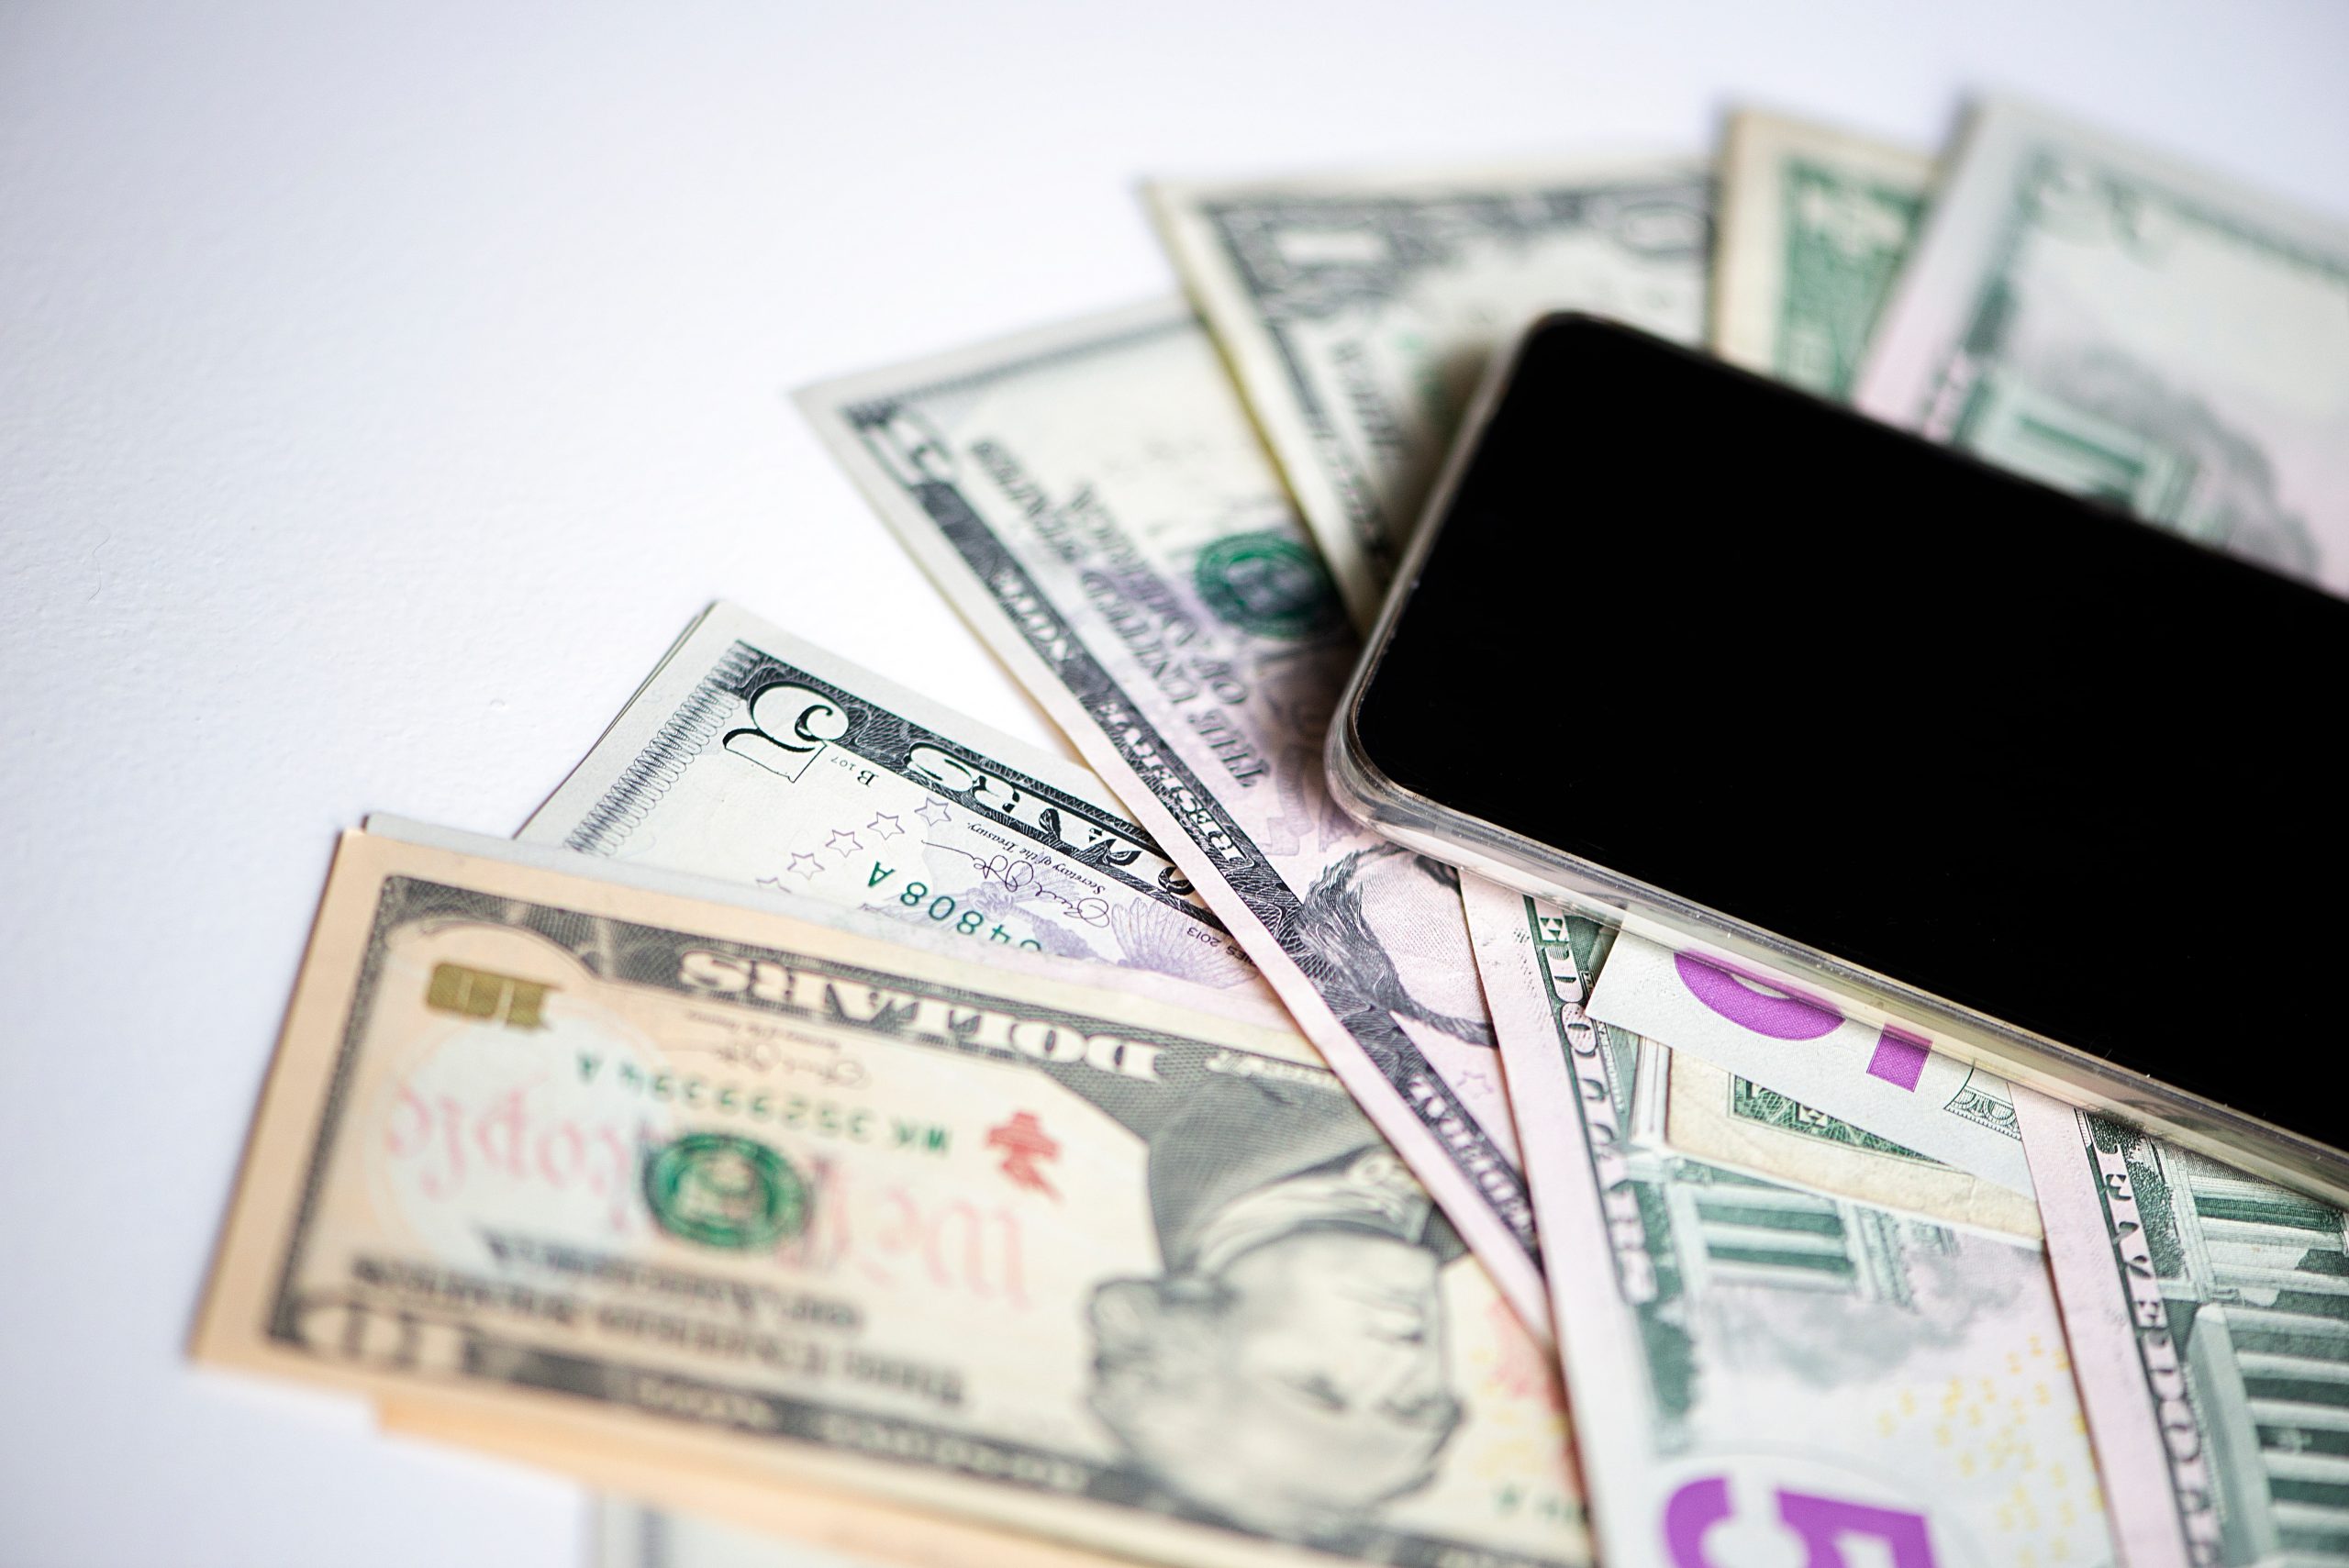 Cash Yor Your iPhone How To Sell Your iPhone In Baton Rouge